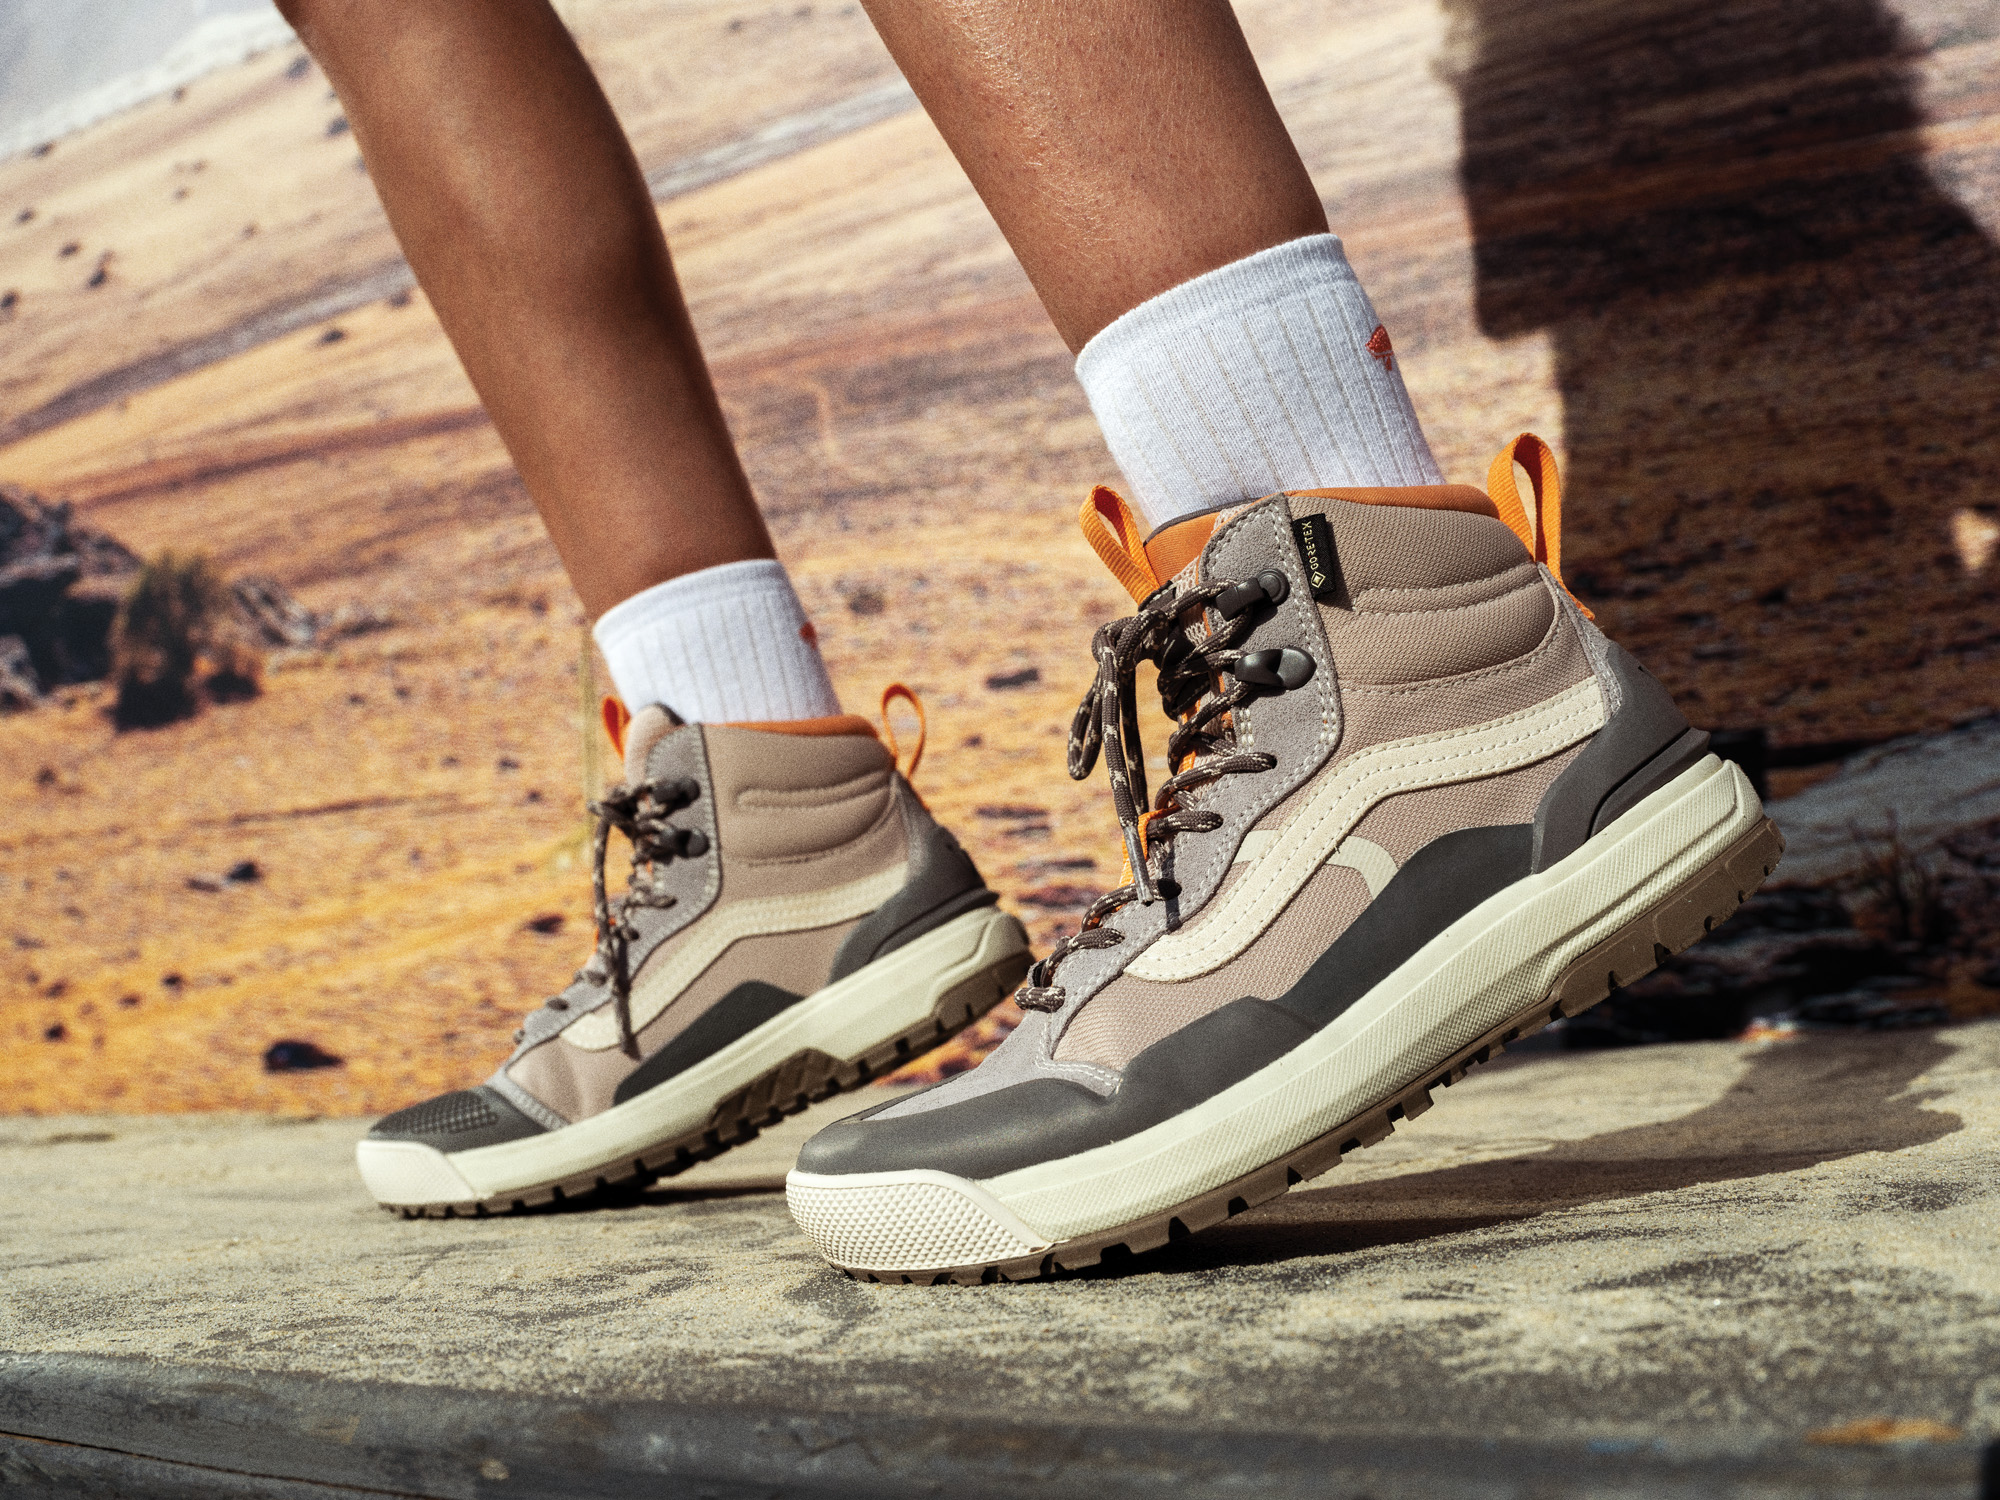 hiking boots: Introducing a warm-weather addition to the - The Manual